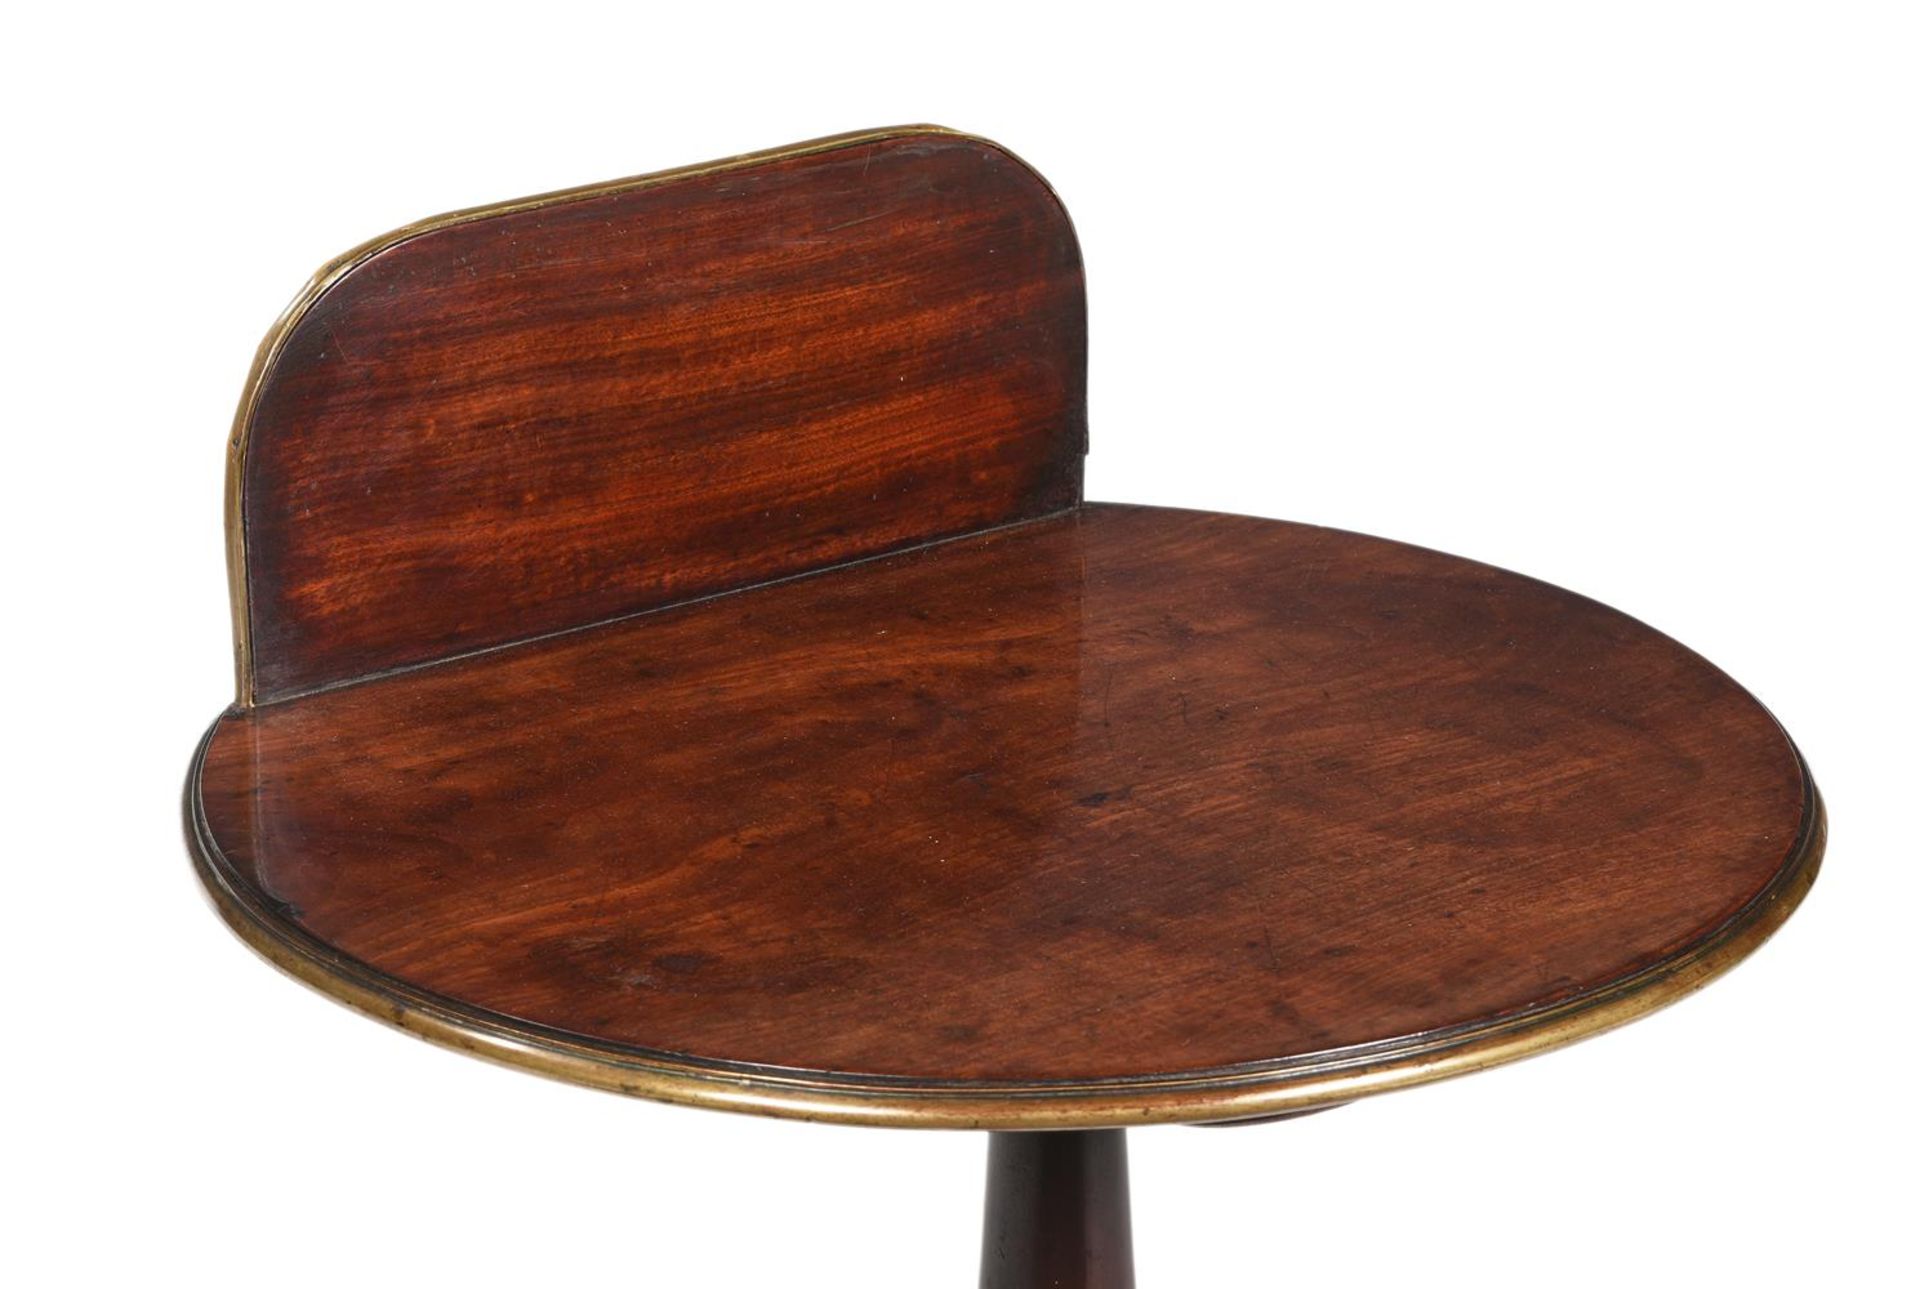 AN UNUSUAL GEORGE III MAHOGANY AND BRASS MOUNTED READING OR OCCASIONAL TABLE, CIRCA 1800 - Image 2 of 4